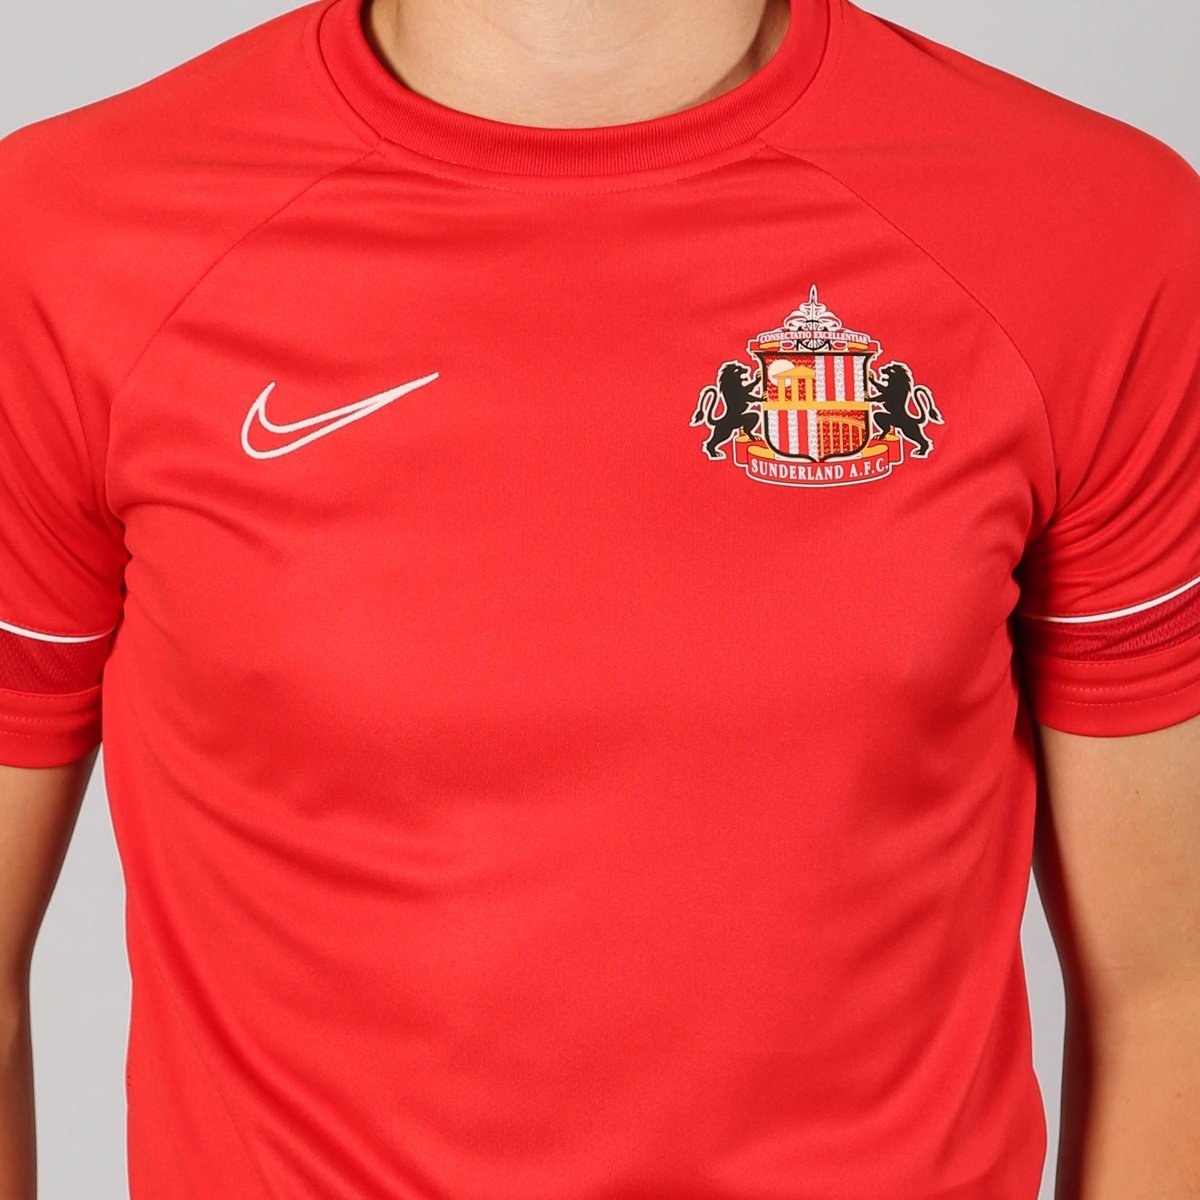 Buy the 21-22 Matchday Warm Up Tee online at Sunderland AFC Store